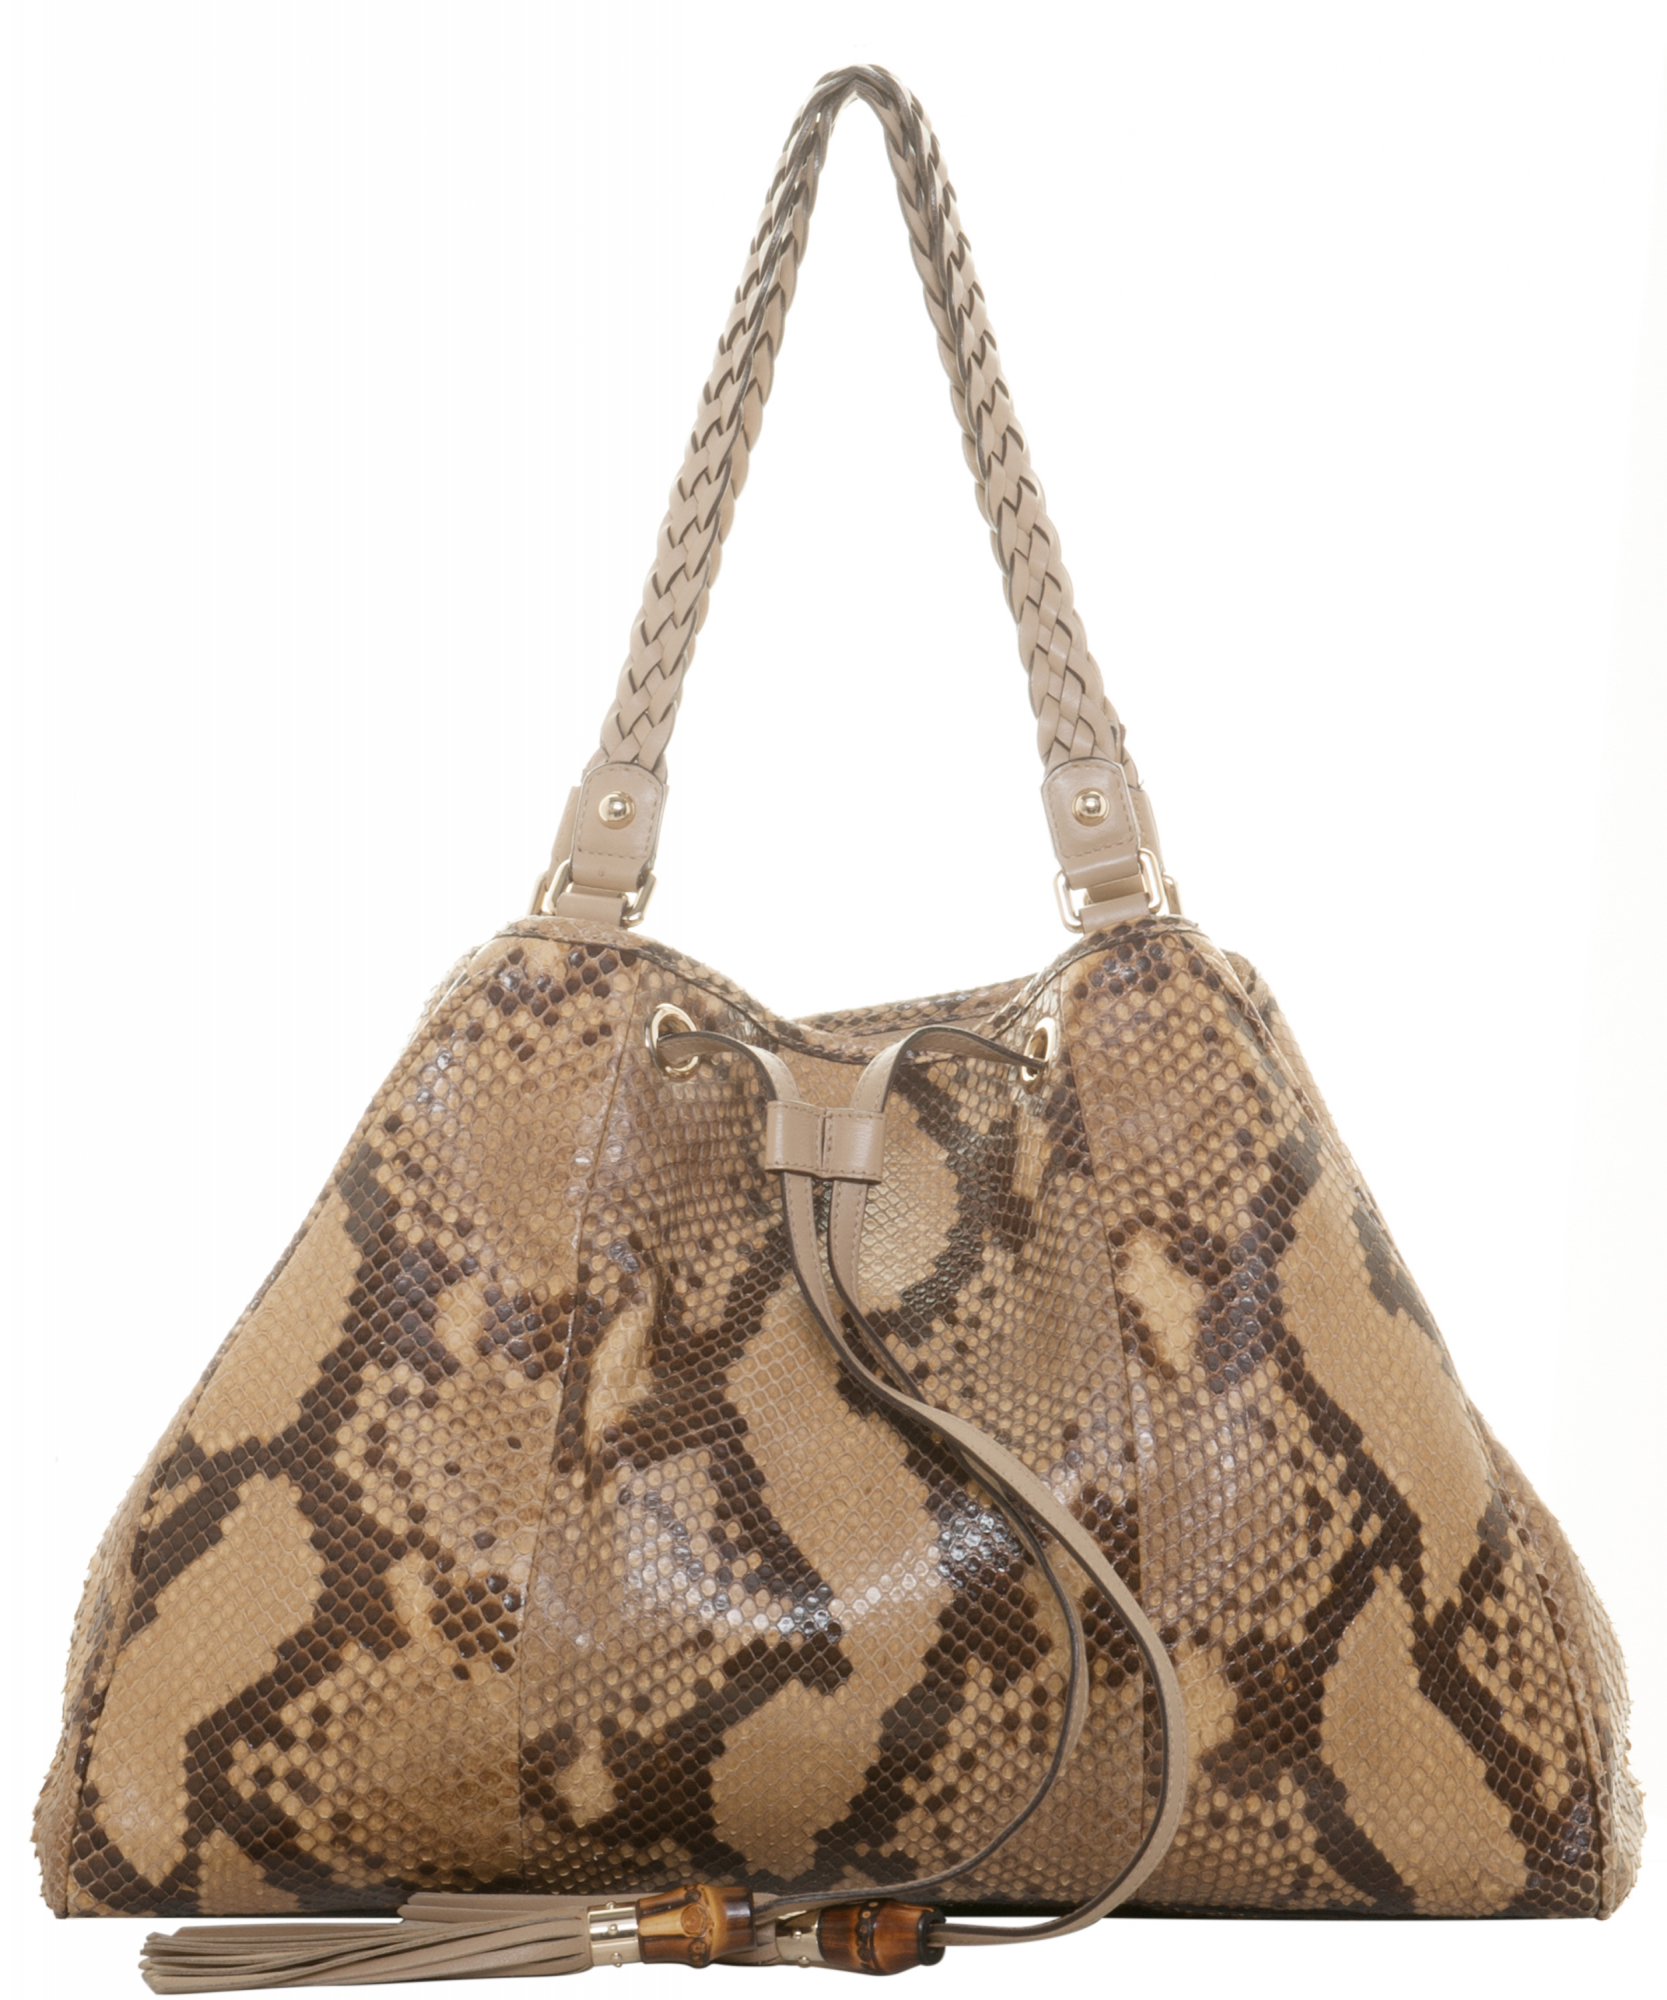 Gucci Beige & Brown Snakeskin Leather Bag With Black Bamboo Top Handles  Gucci